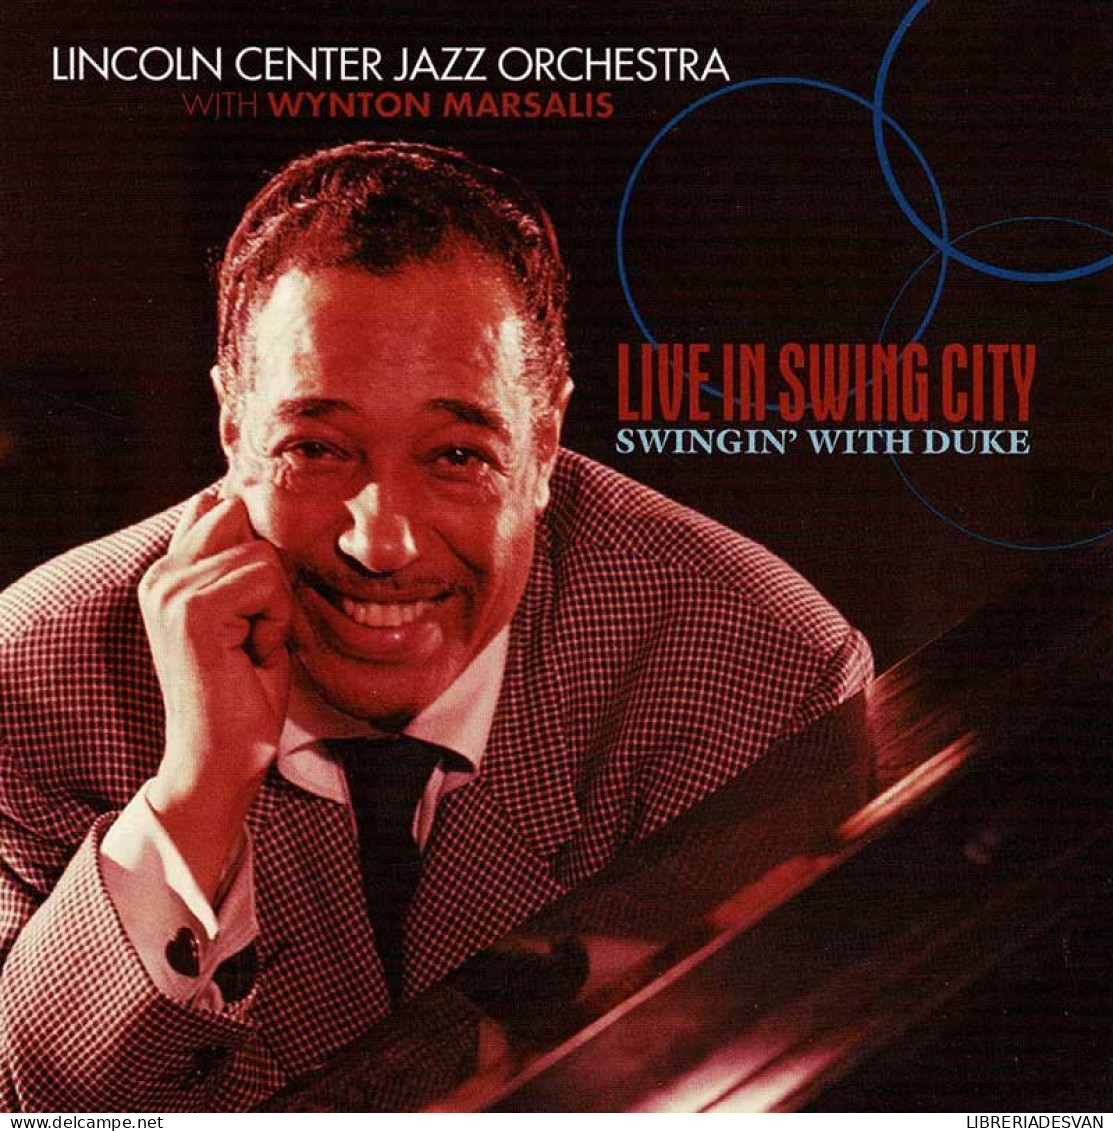 The Lincoln Center Jazz Orchestra With Wynton Marsalis - Live In Swing City, Swingin' With Duke. CD - Jazz